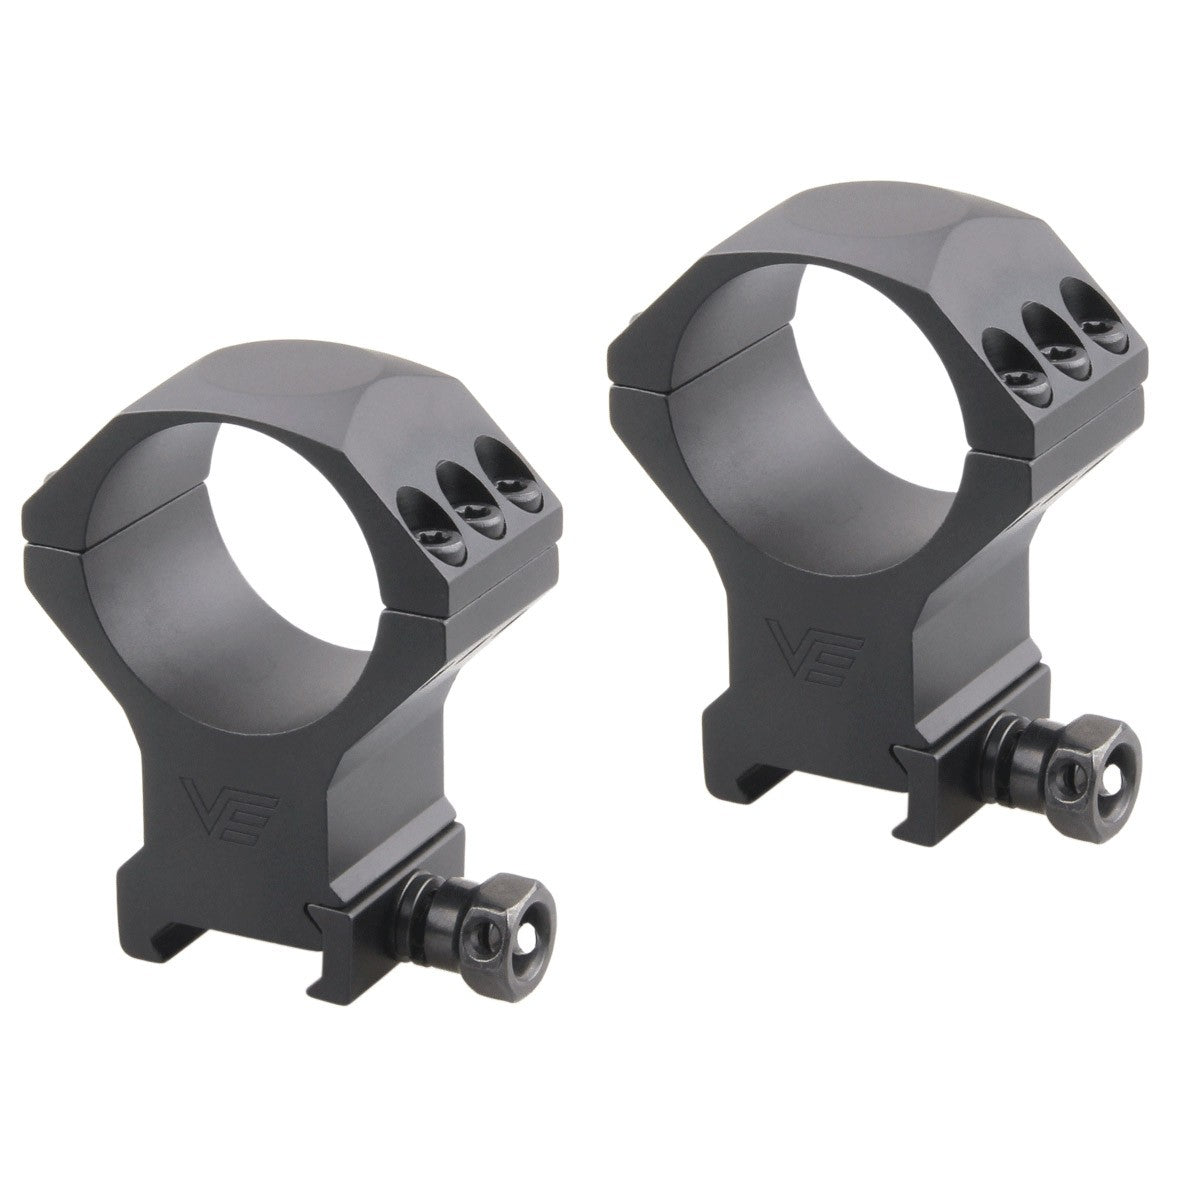 34mm X-ACCU Scope Ring High Front